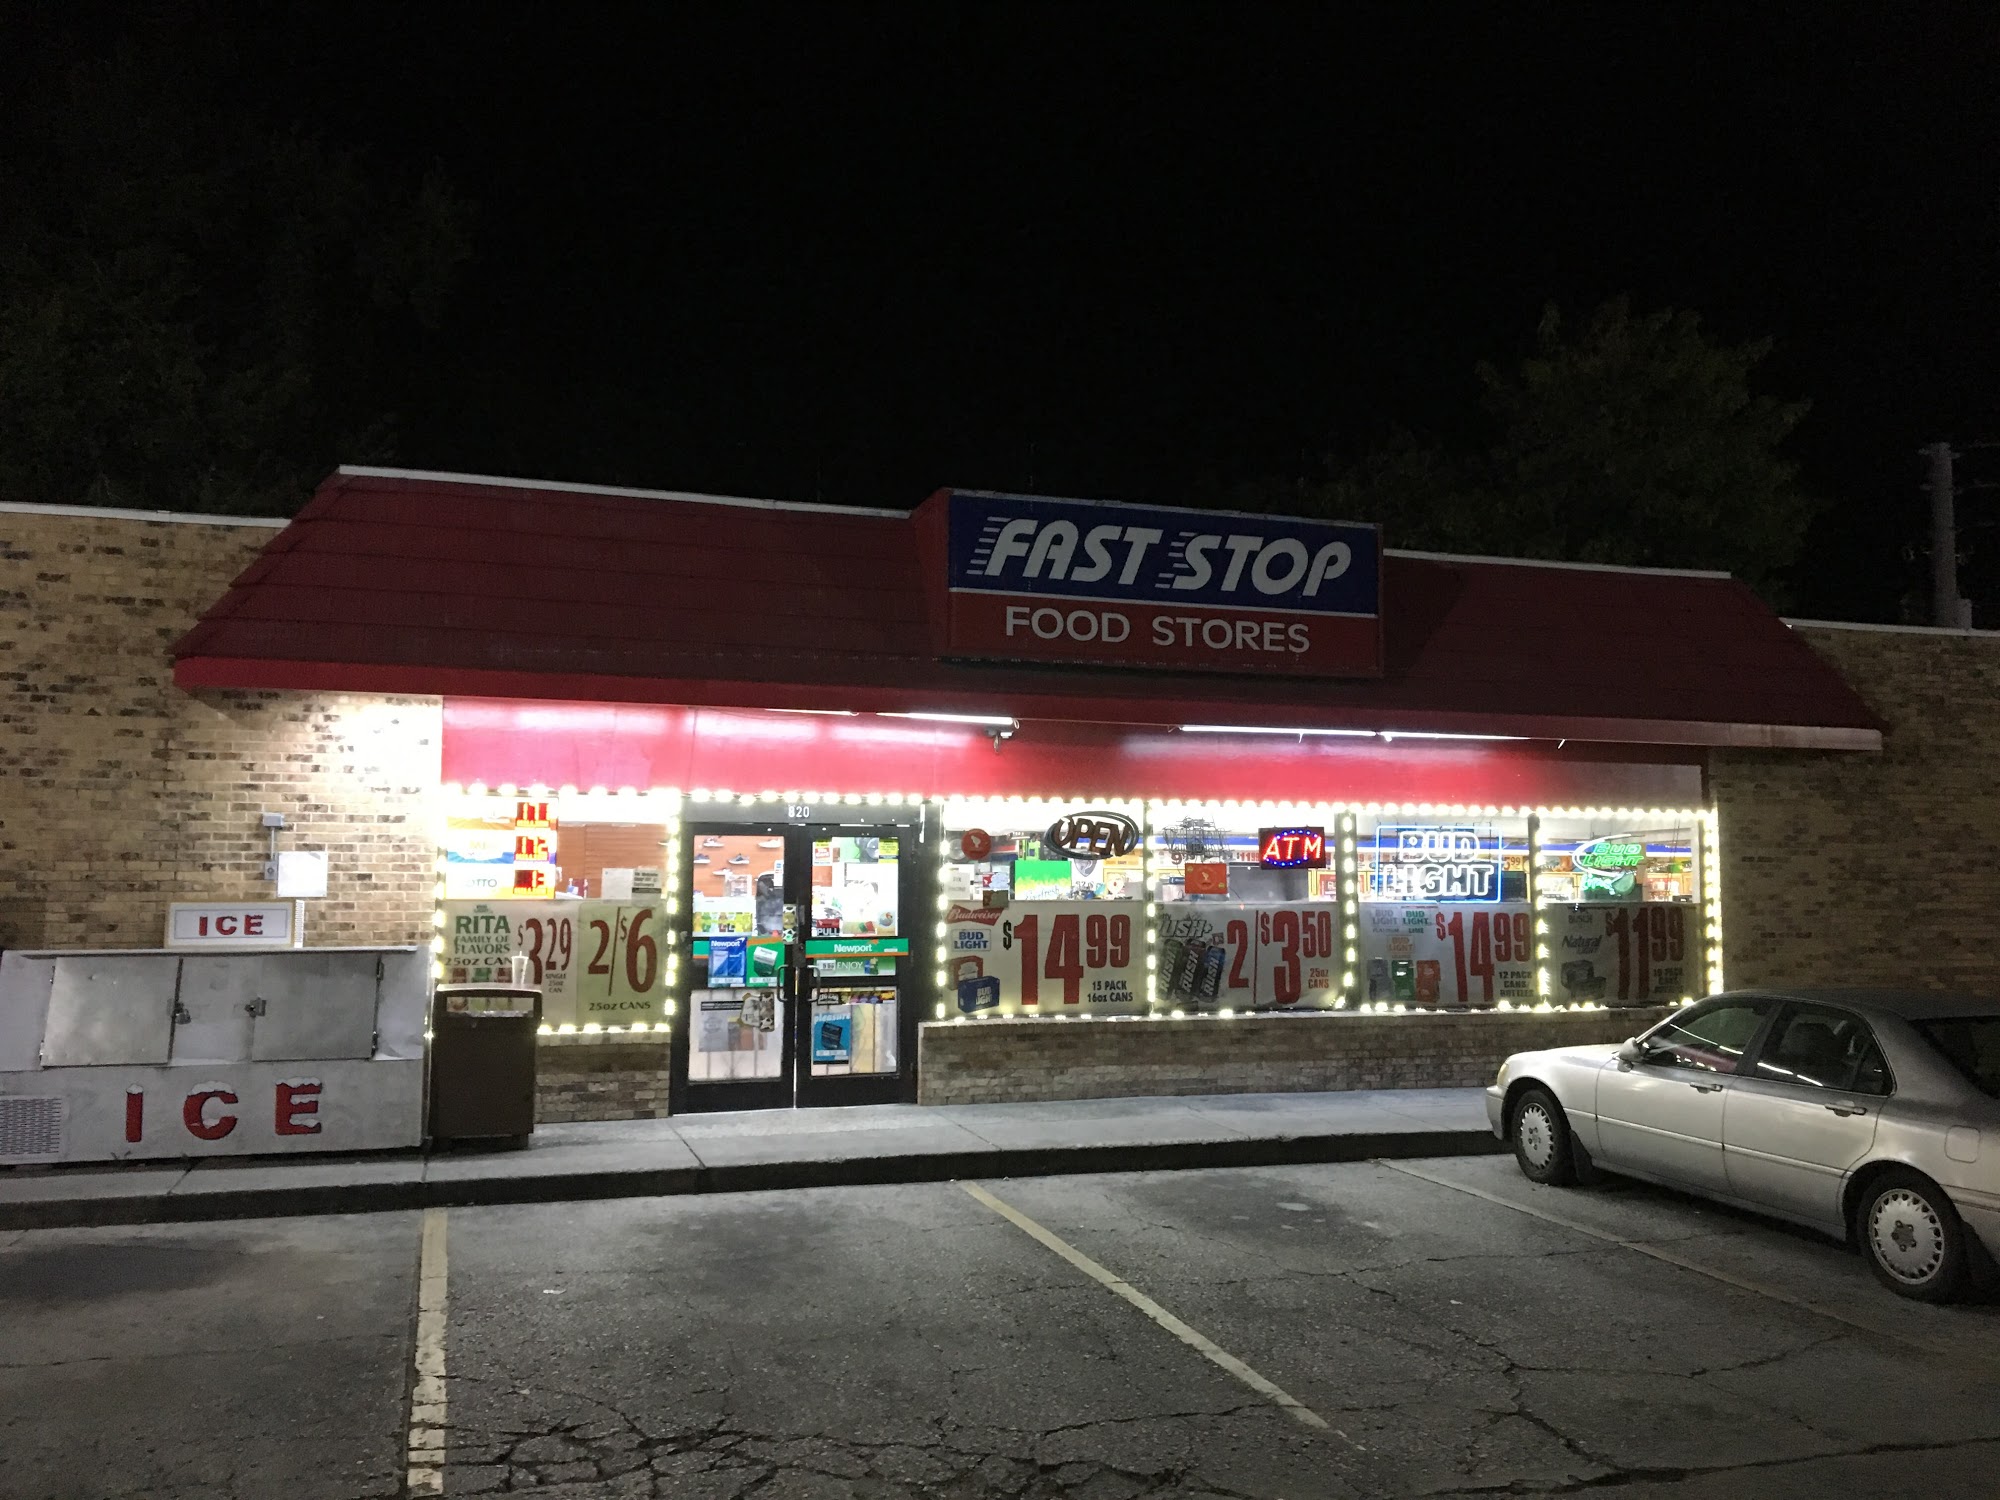 Fast Stop Food Stores